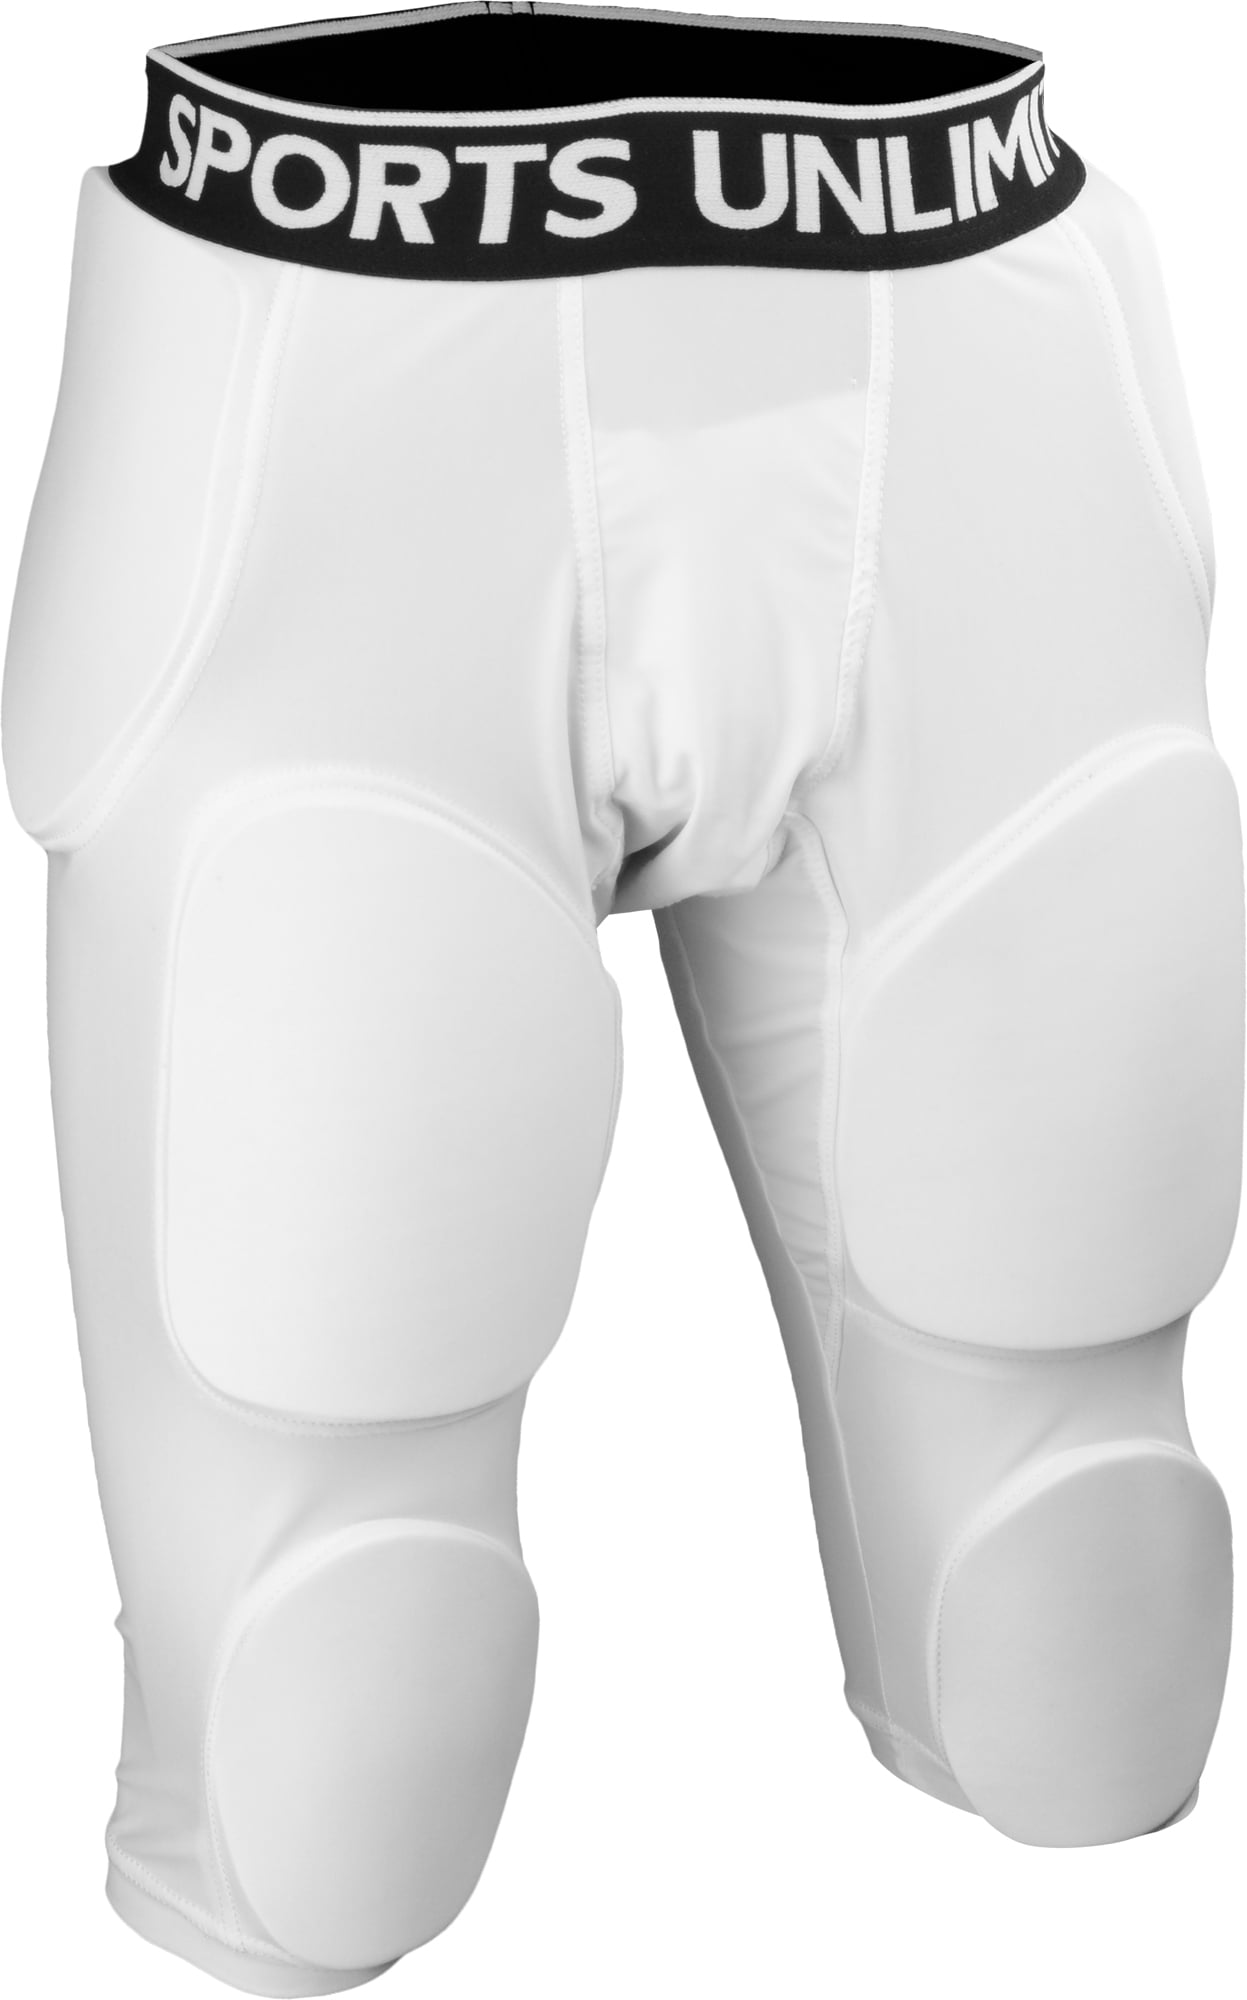 Barnett FS-06 Compression Shorts 5-Pad Integrated Protection for Football Baseball Basketball Youth & Adult Sizes, M 